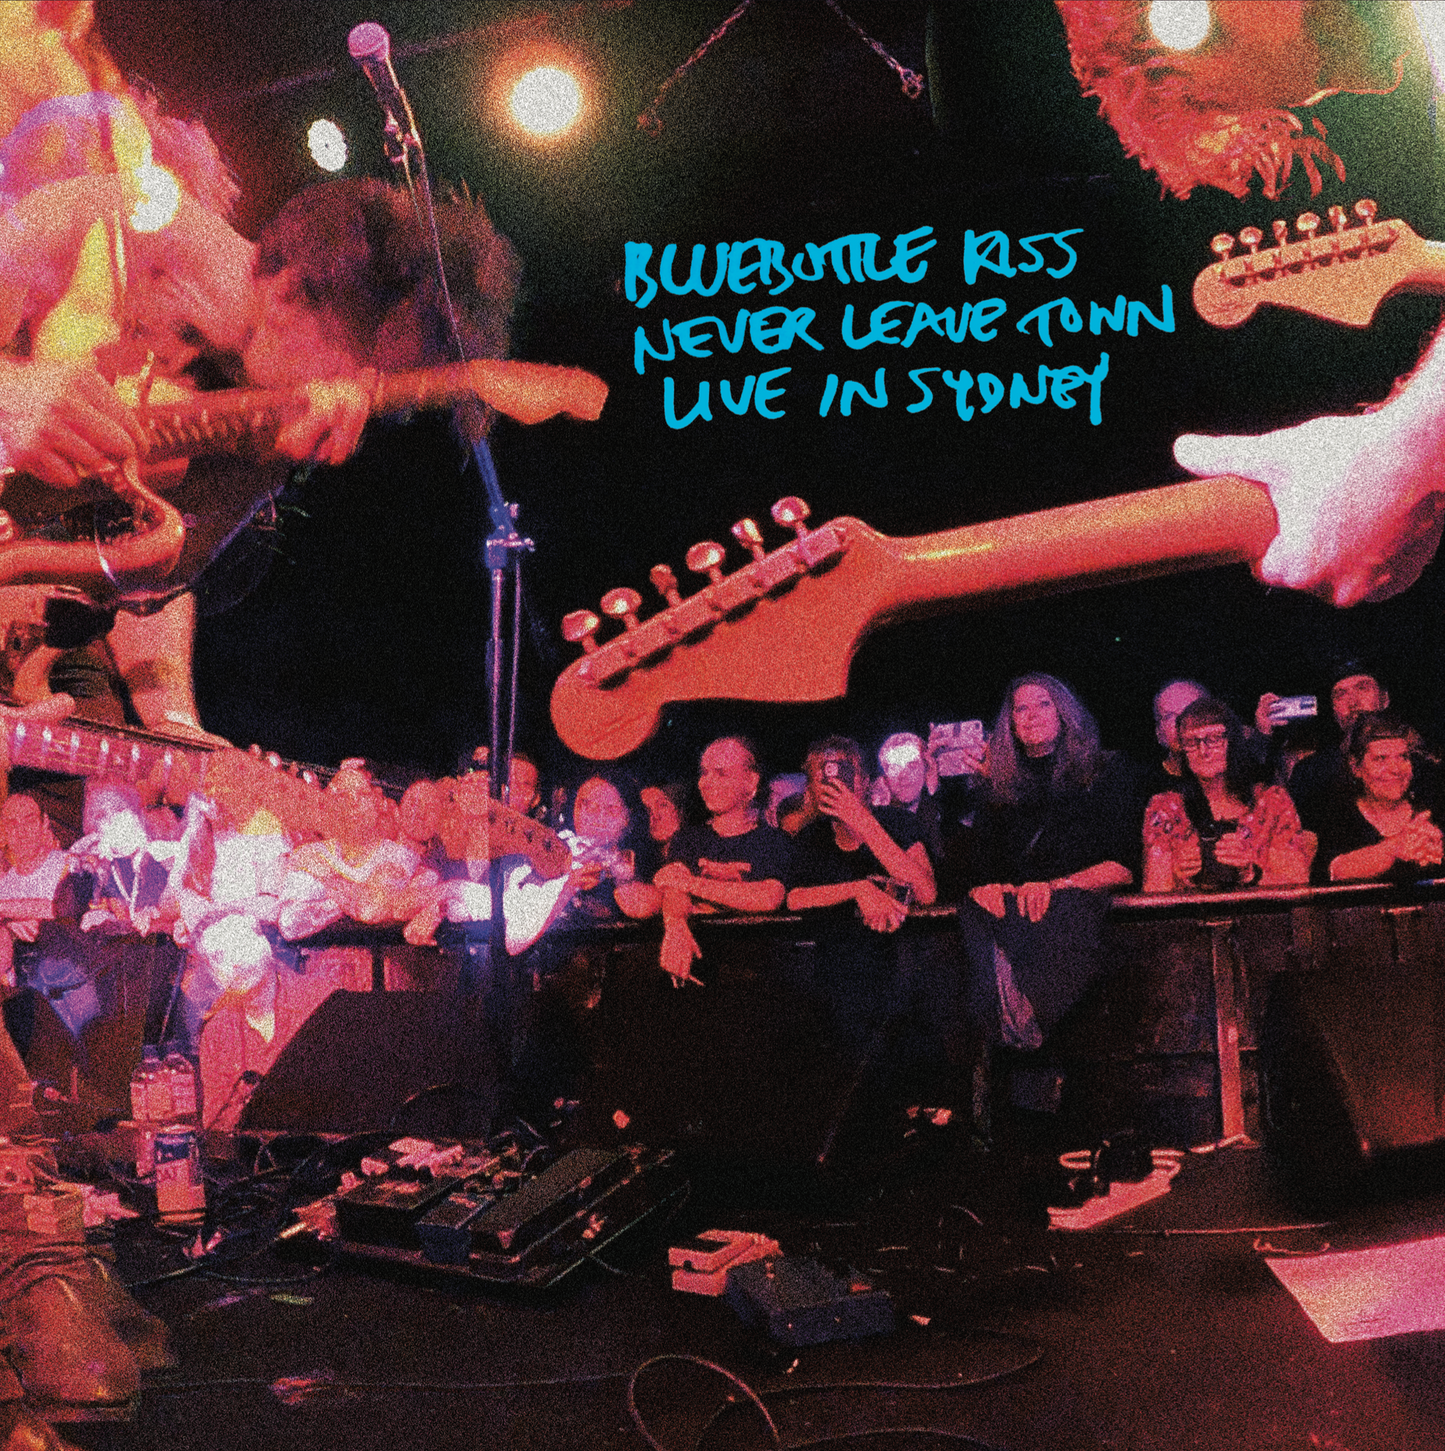 Bluebottle Kiss - Never Leave Town - Live in Sydney - Limited Edition Compact Disc